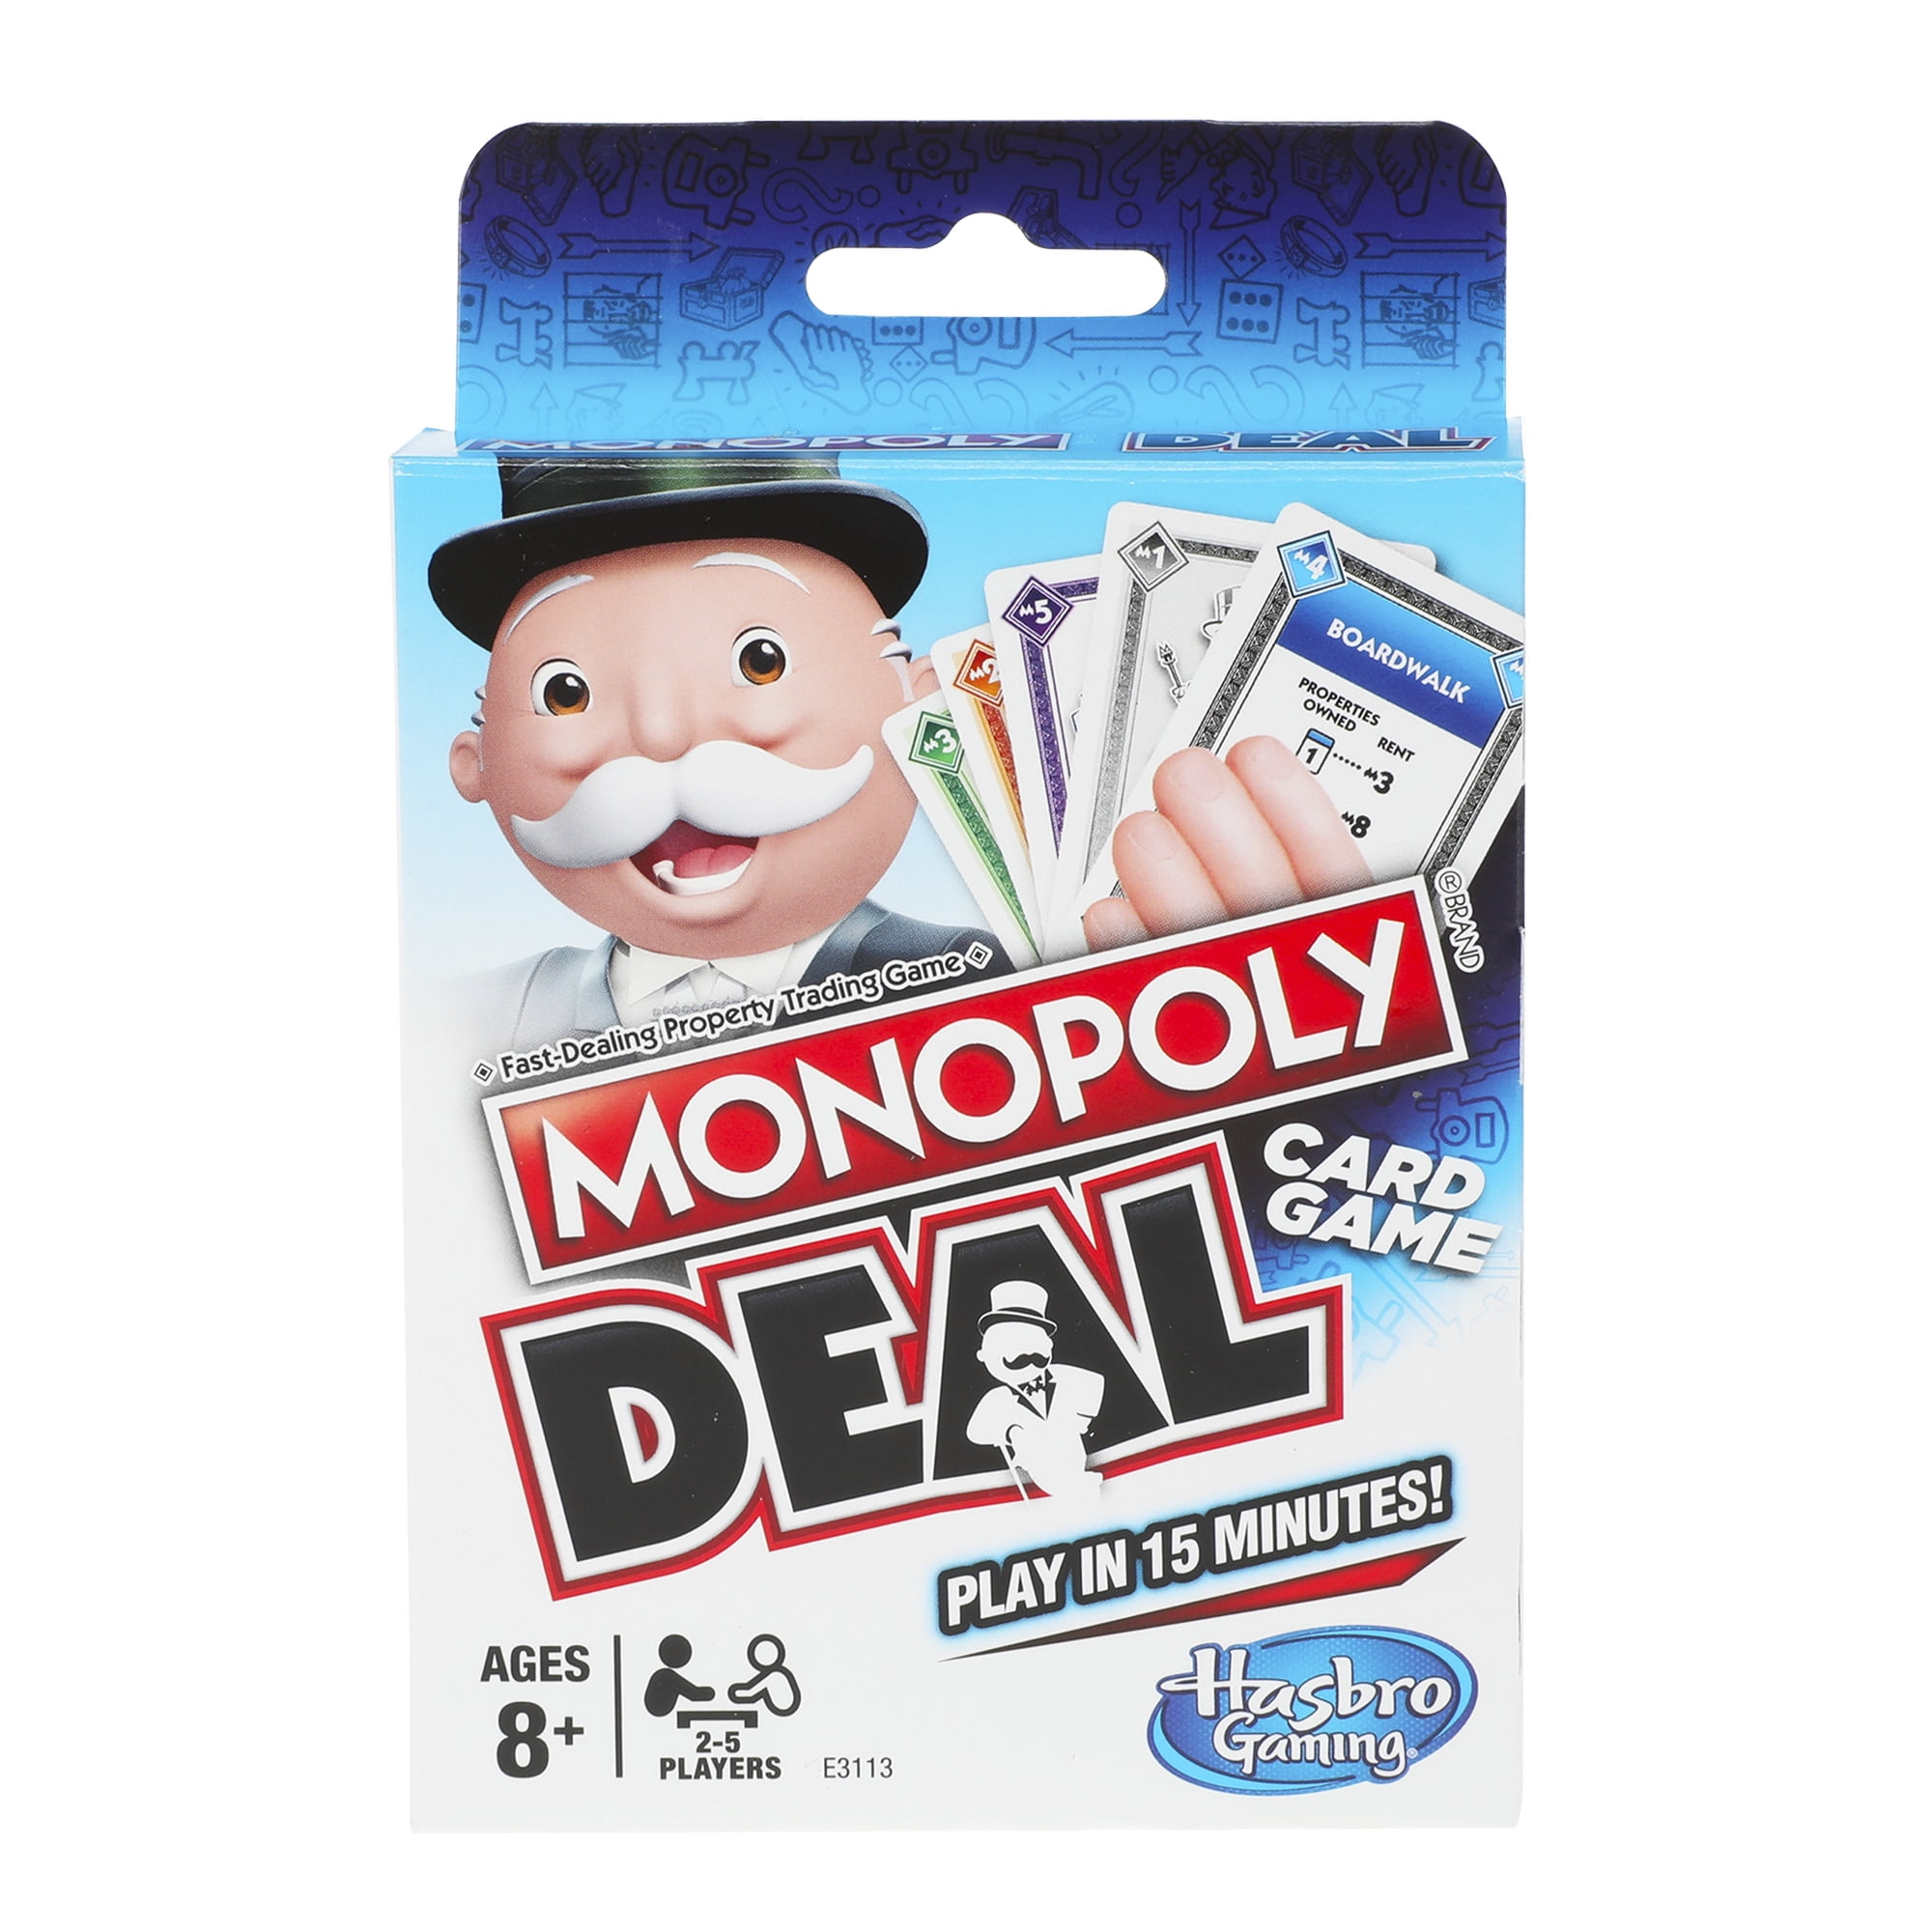 Family Game Monopoly Deal Card Game Funskool 2-5 Players Indoor Game Age 8 for sale online